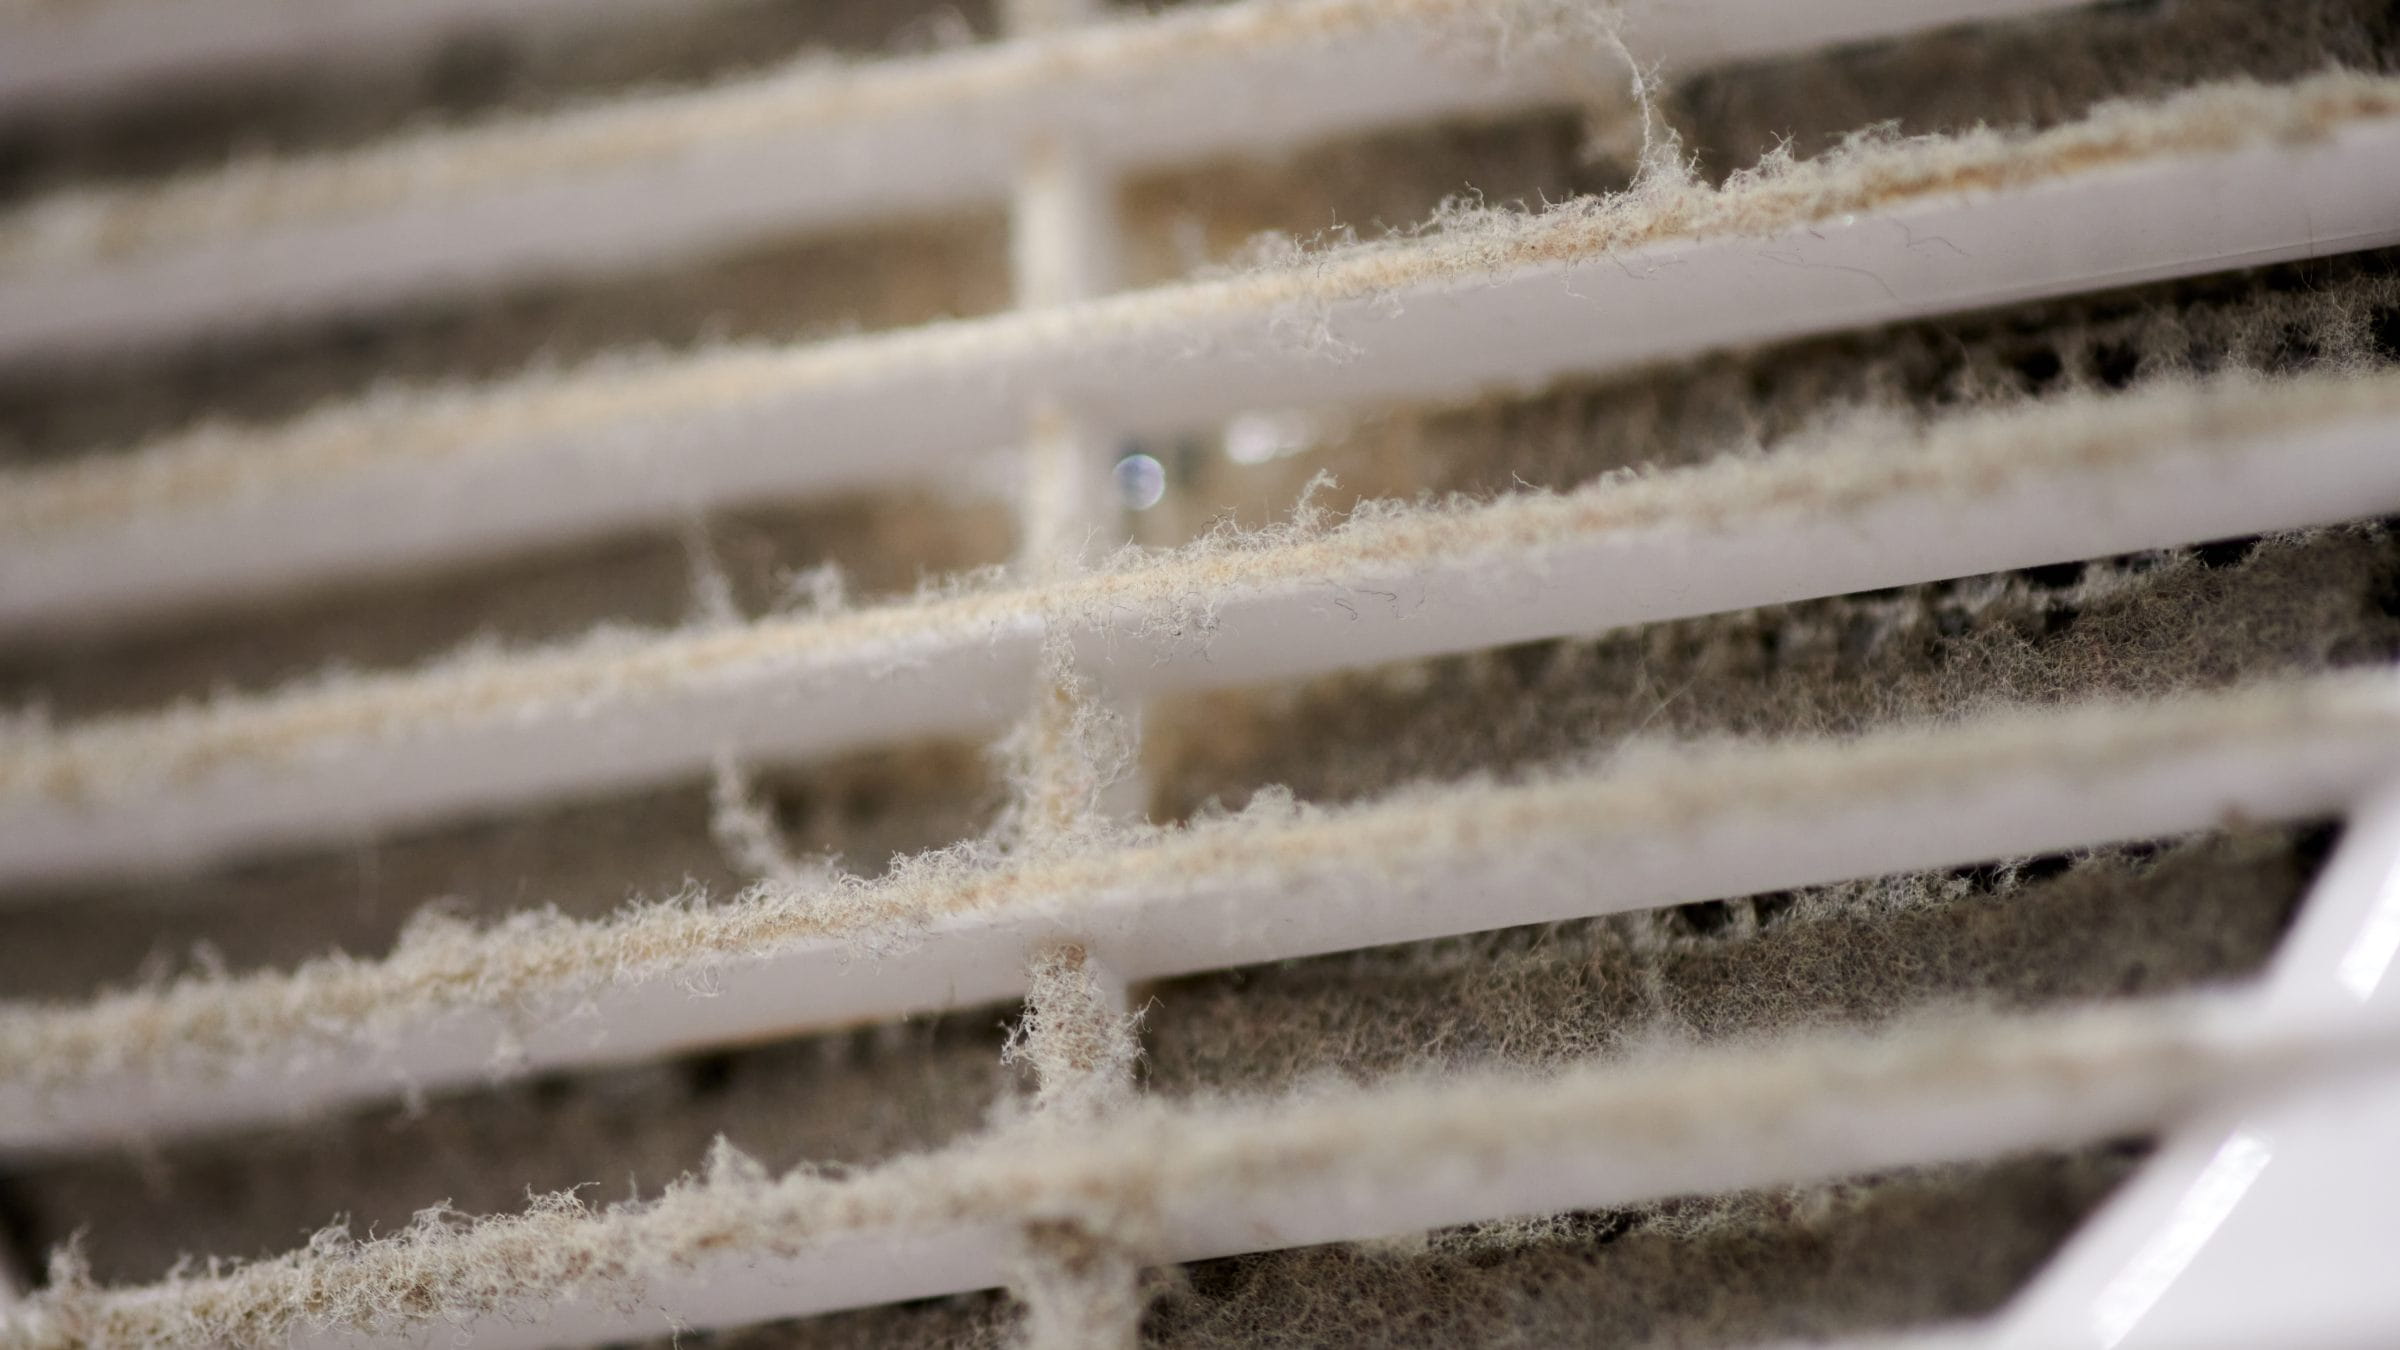 Dirty air ventilation grille of HVAC